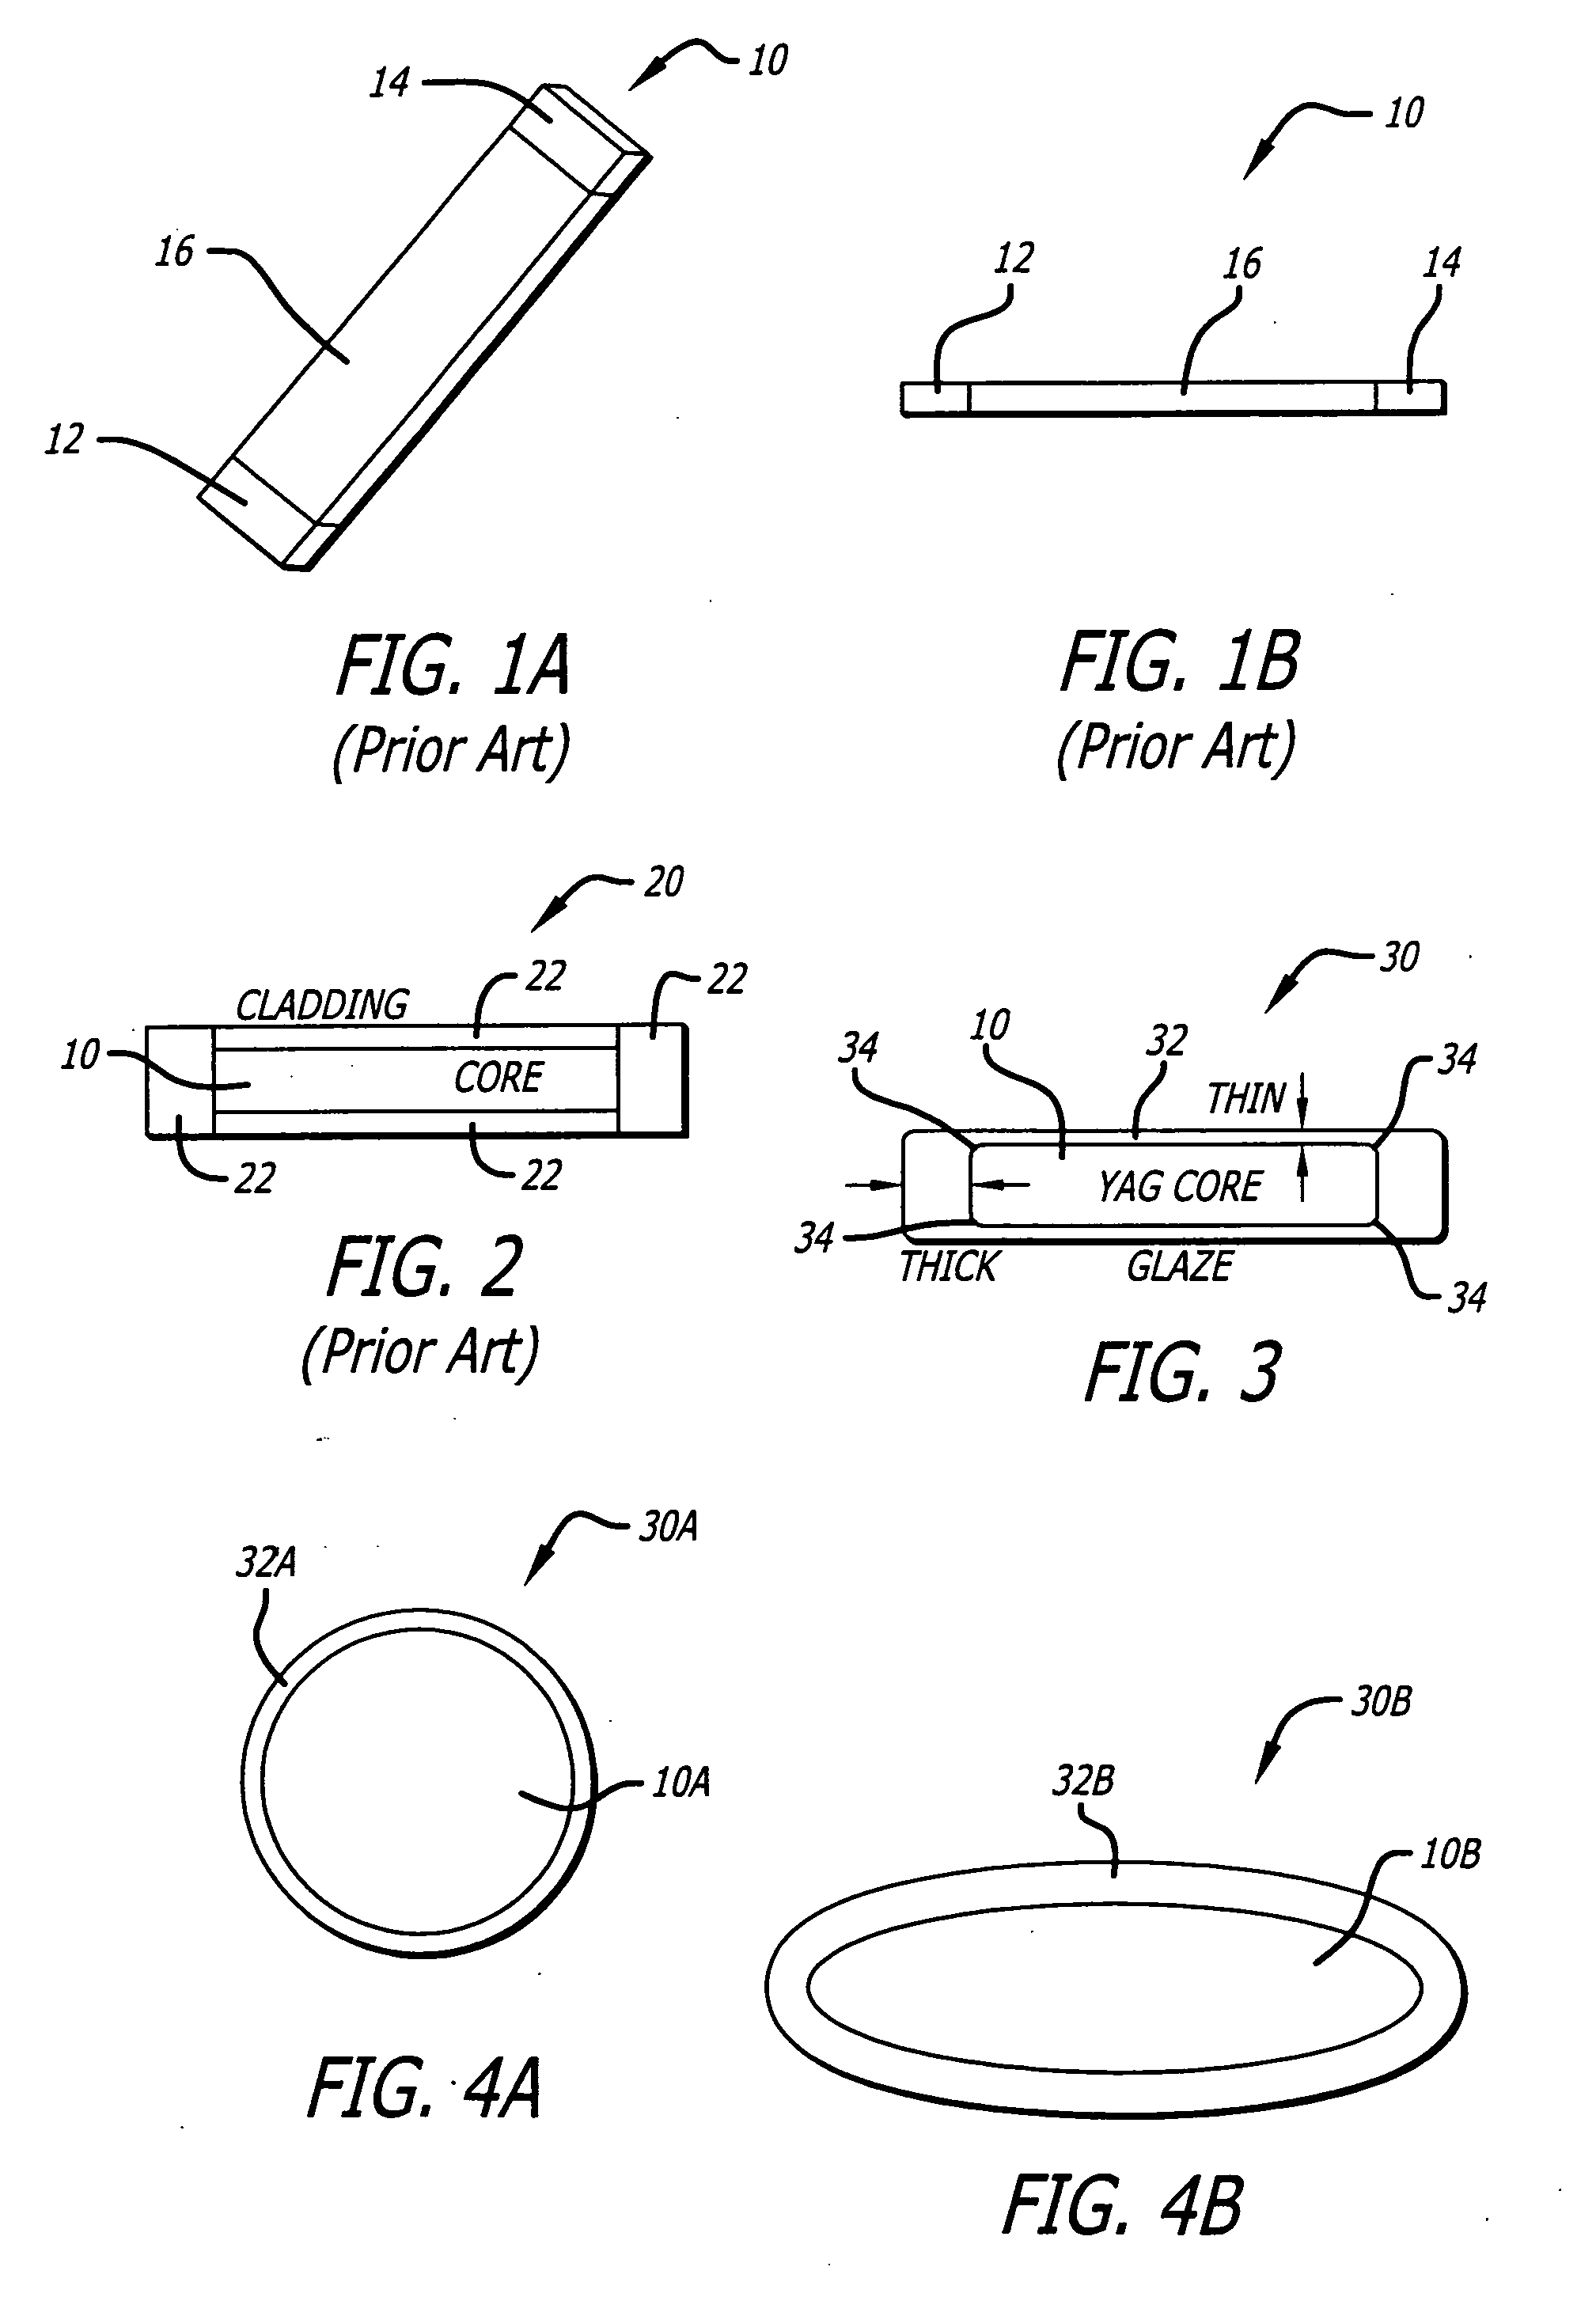 Articulated glaze cladding for laser components and method of encapsulation